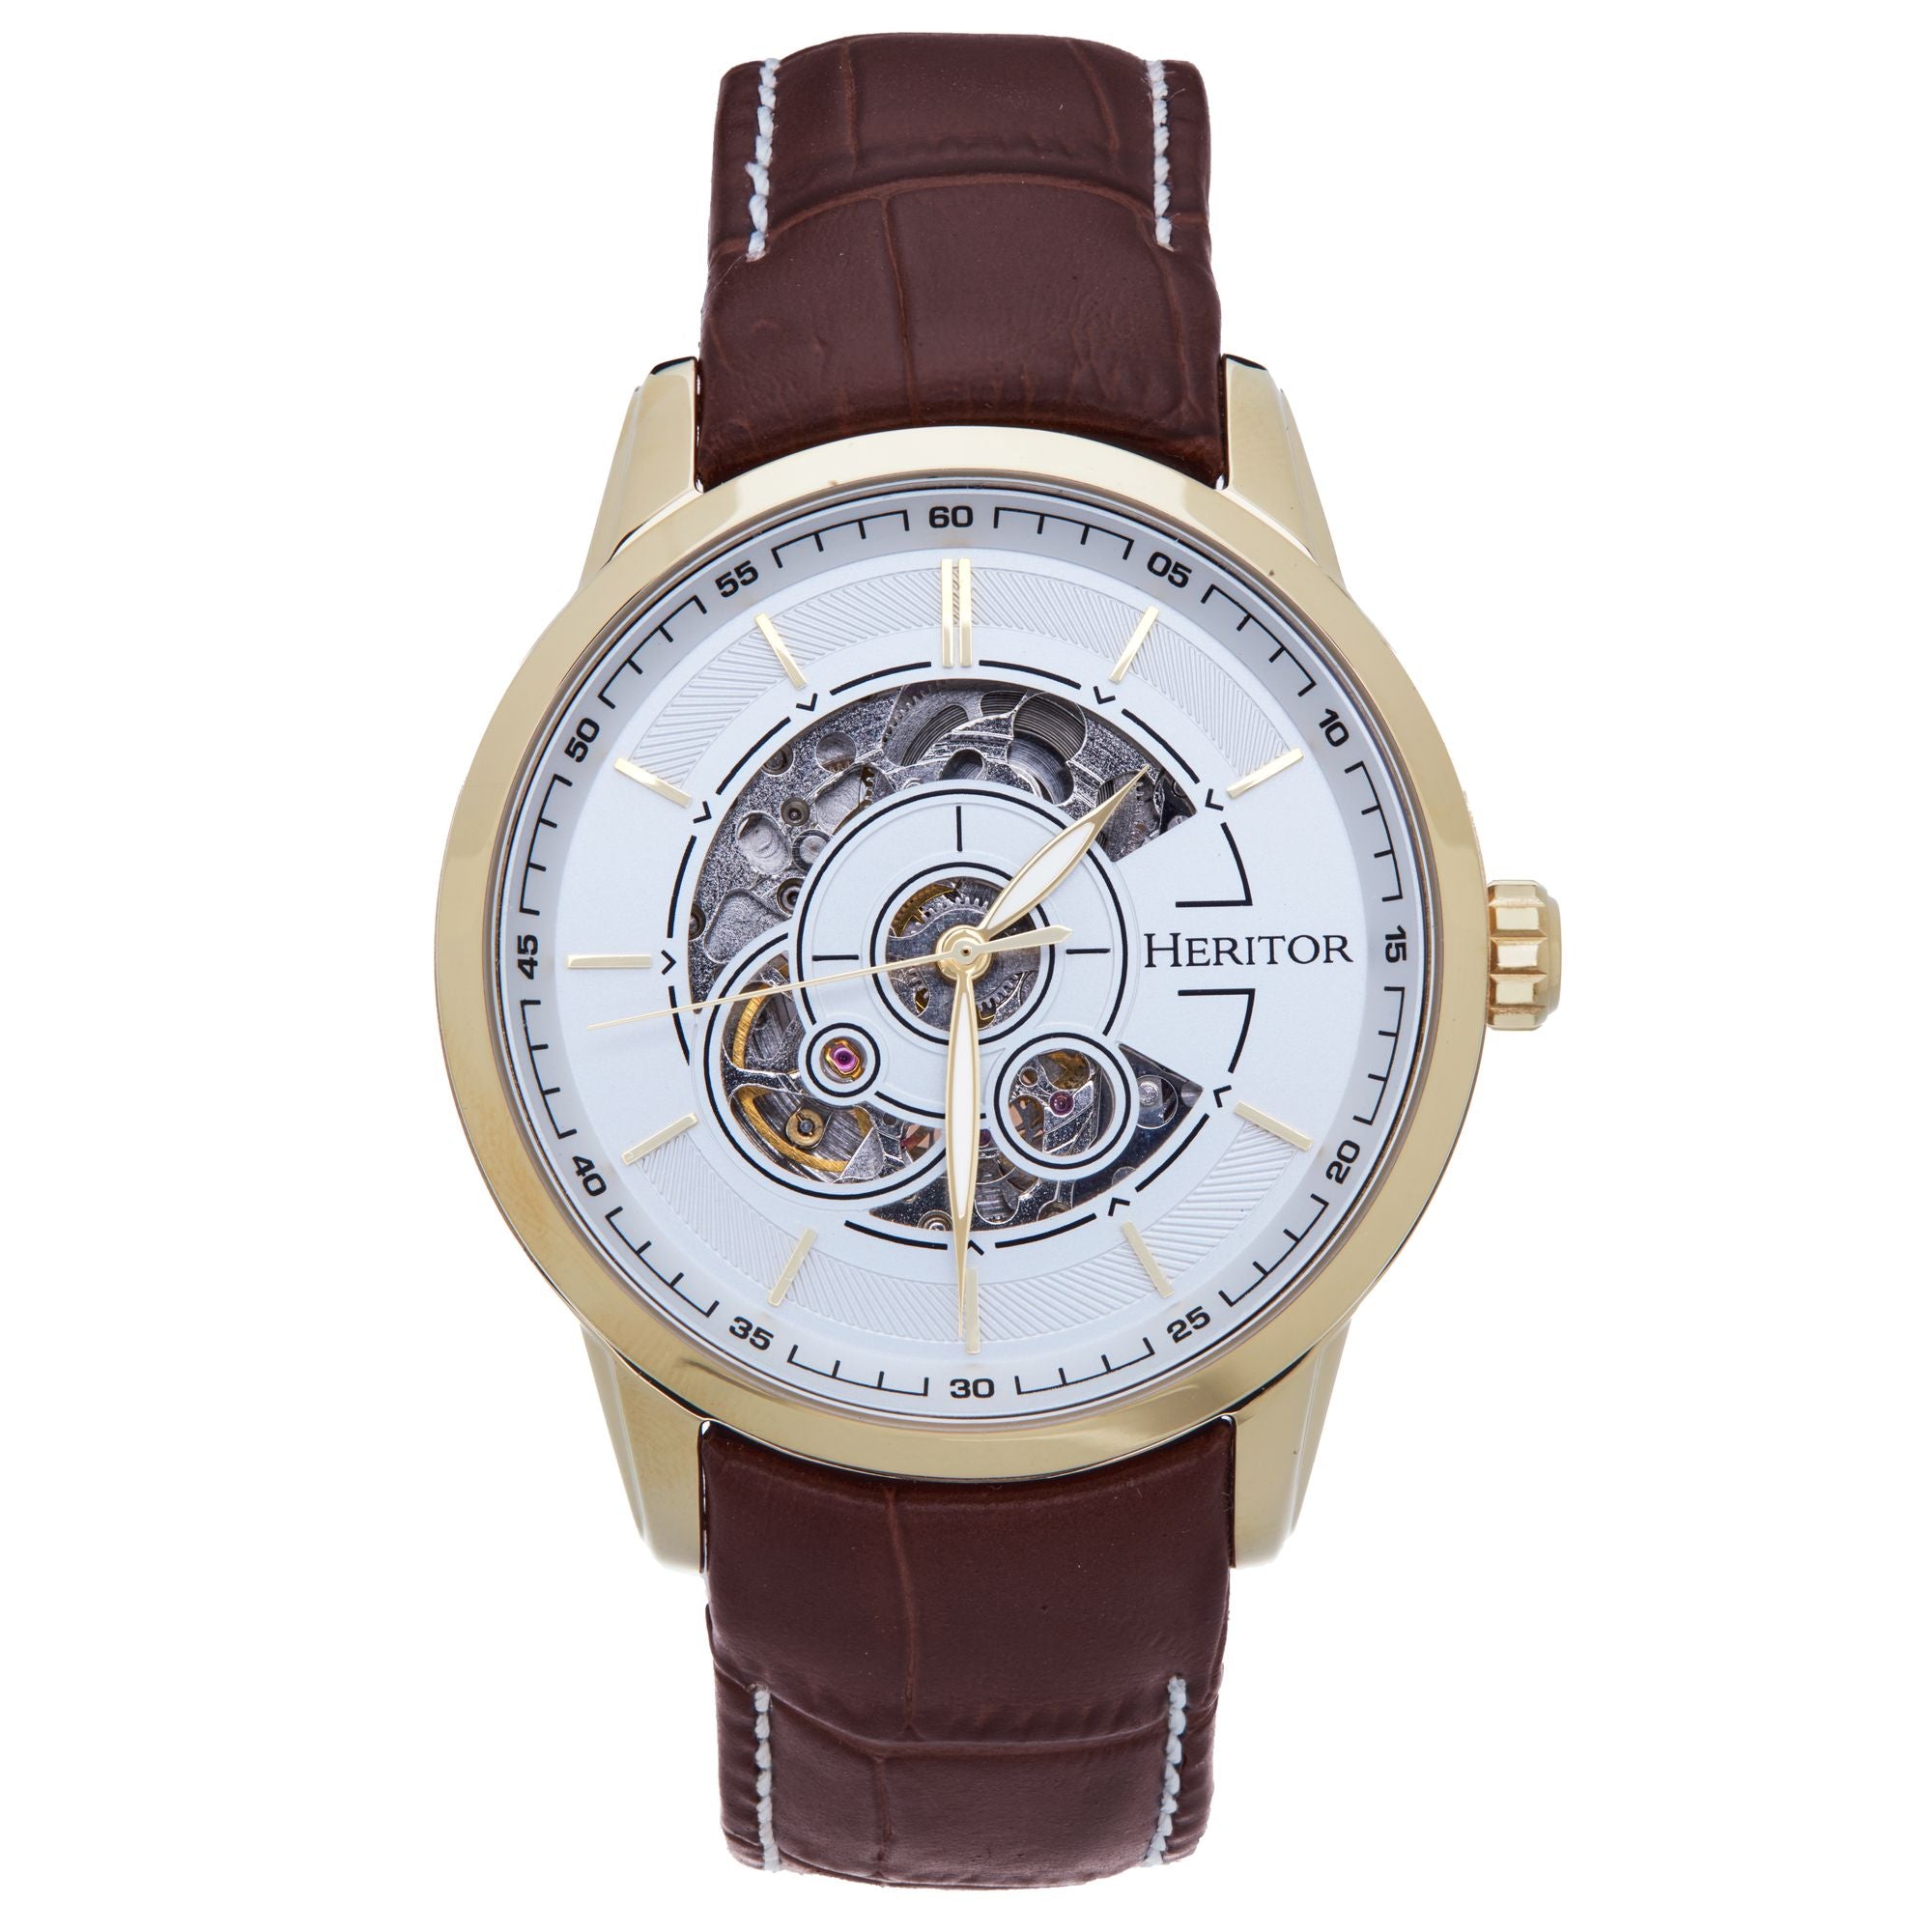 Men’s Davies Semi-Skeleton Leather-Band Watch - Gold One Size Heritor Automatic